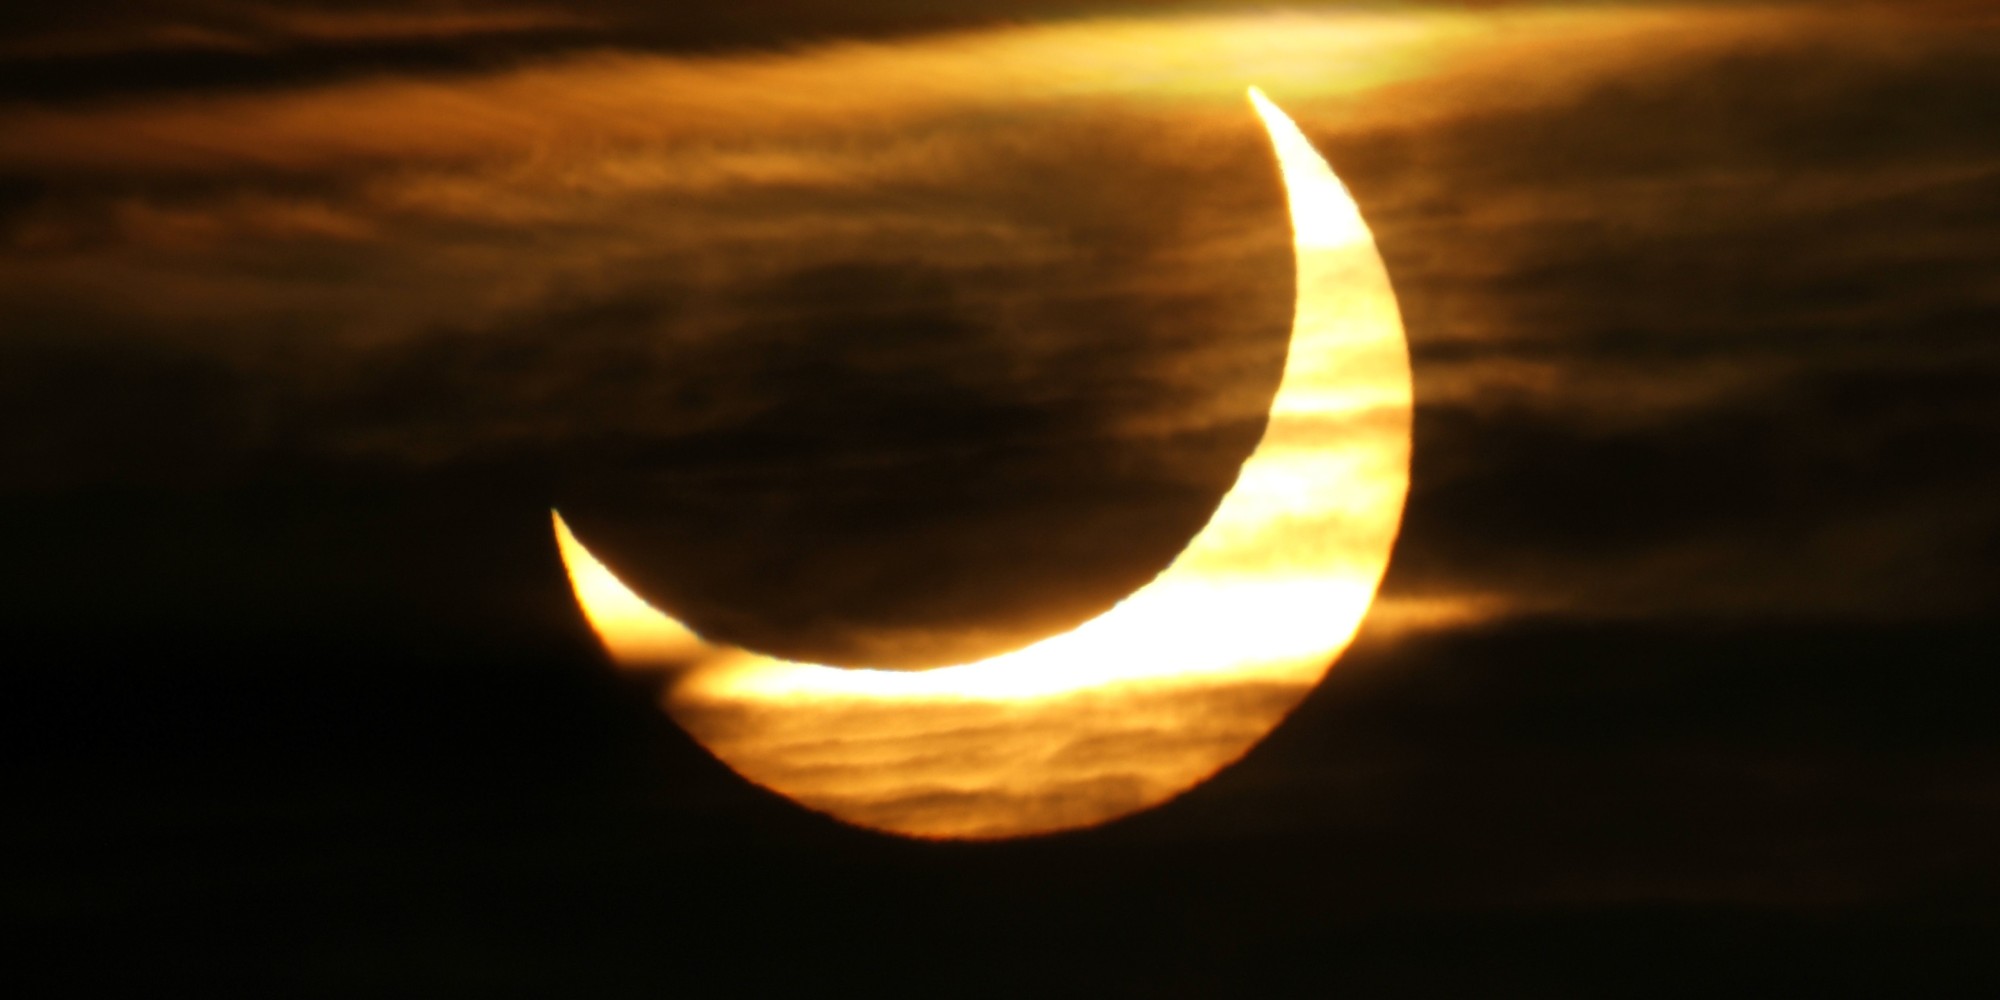 Partial Solar Eclipse 2014 Arrives Thursday. Here's How To Watch It ...